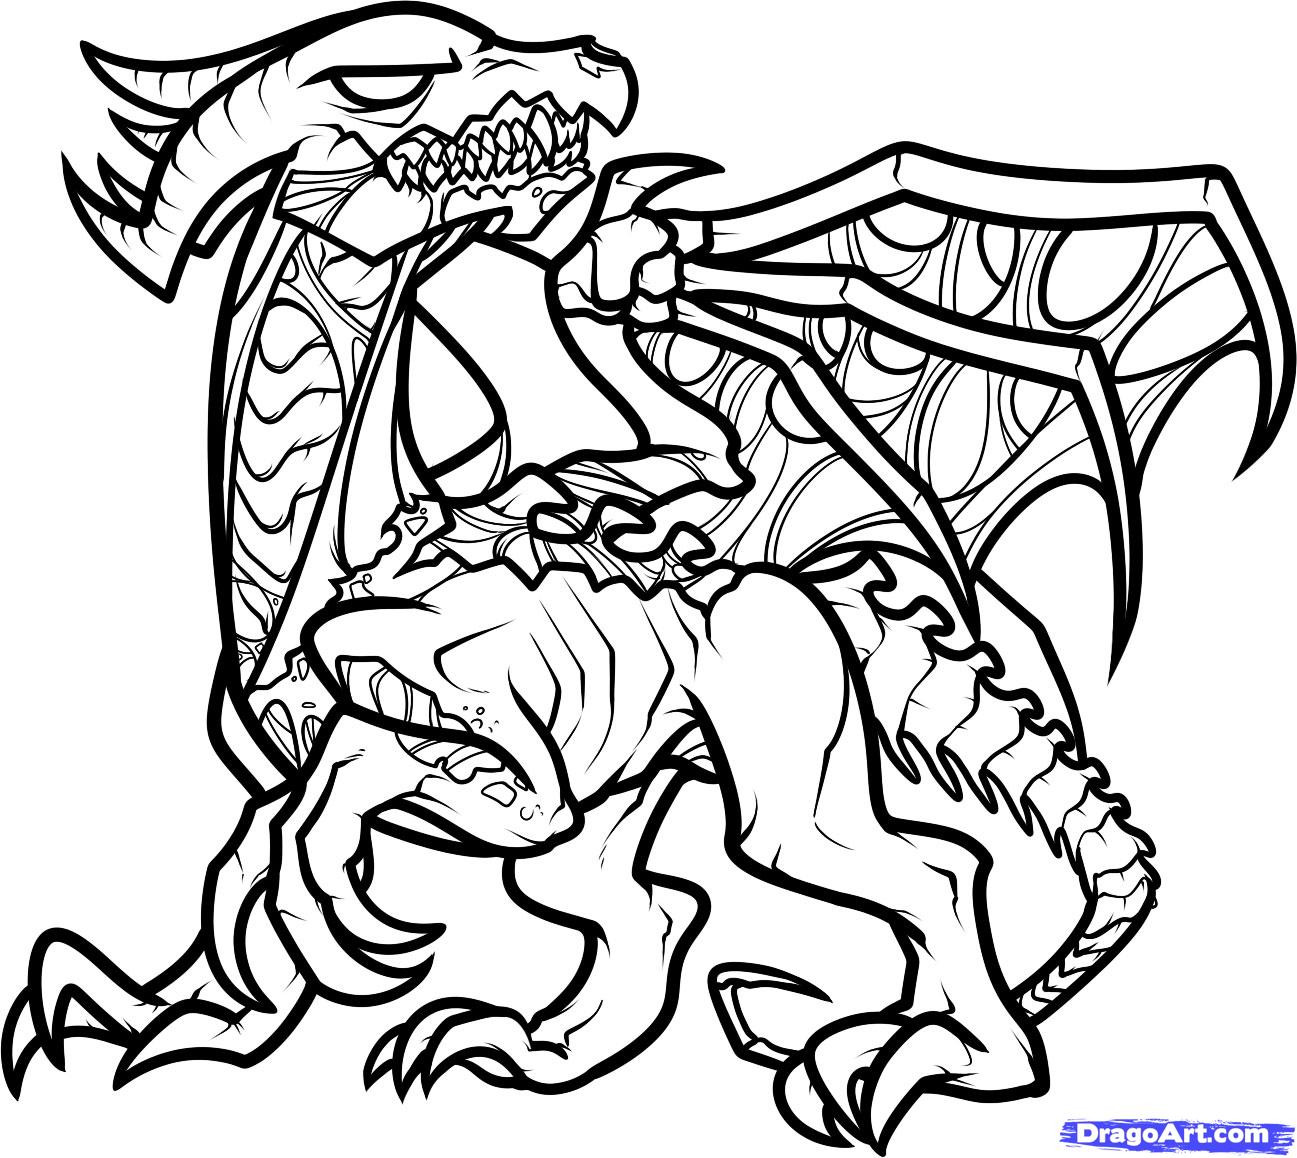 Dragon Coloring Pages Printables
 How to Draw a Death Dragon Step by Step Dragons Draw a